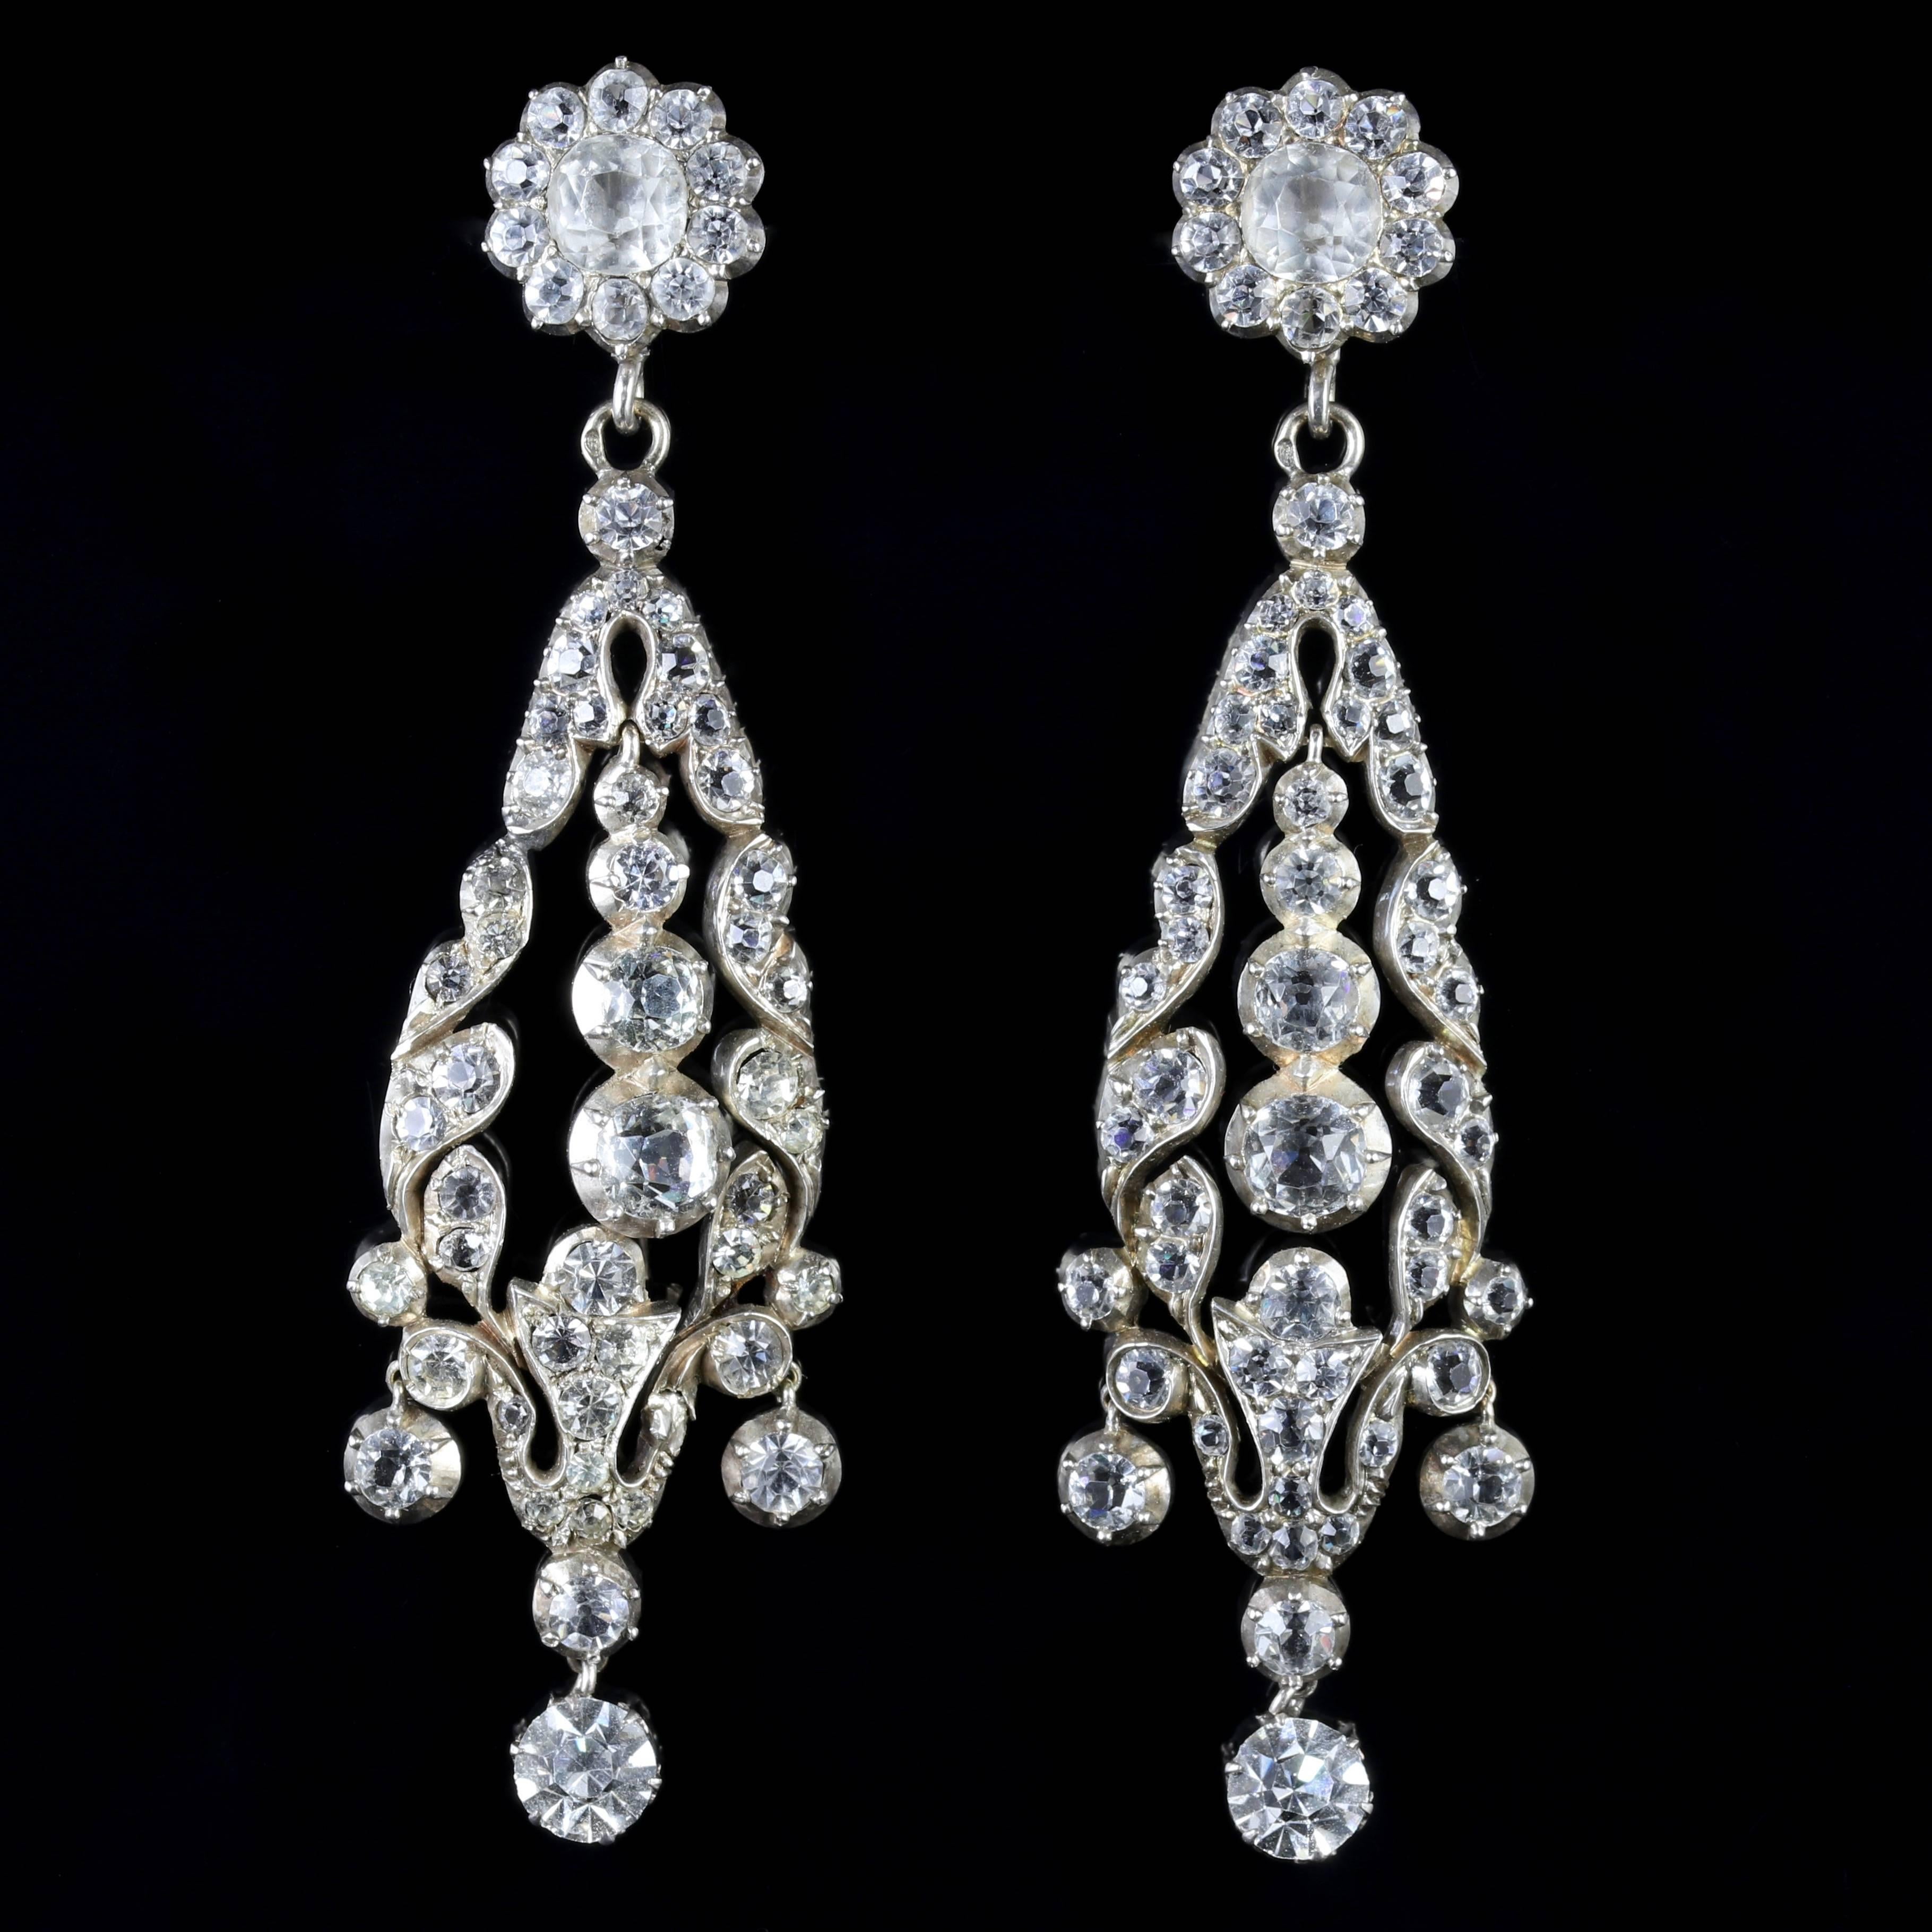 To read more please click continue reading below-

These are truly magnificent, a genuine pair of Sterling Silver Georgian Paste earrings which are complete in their original box.

Due to its age, Georgian jewellery is quite rare, with some pieces